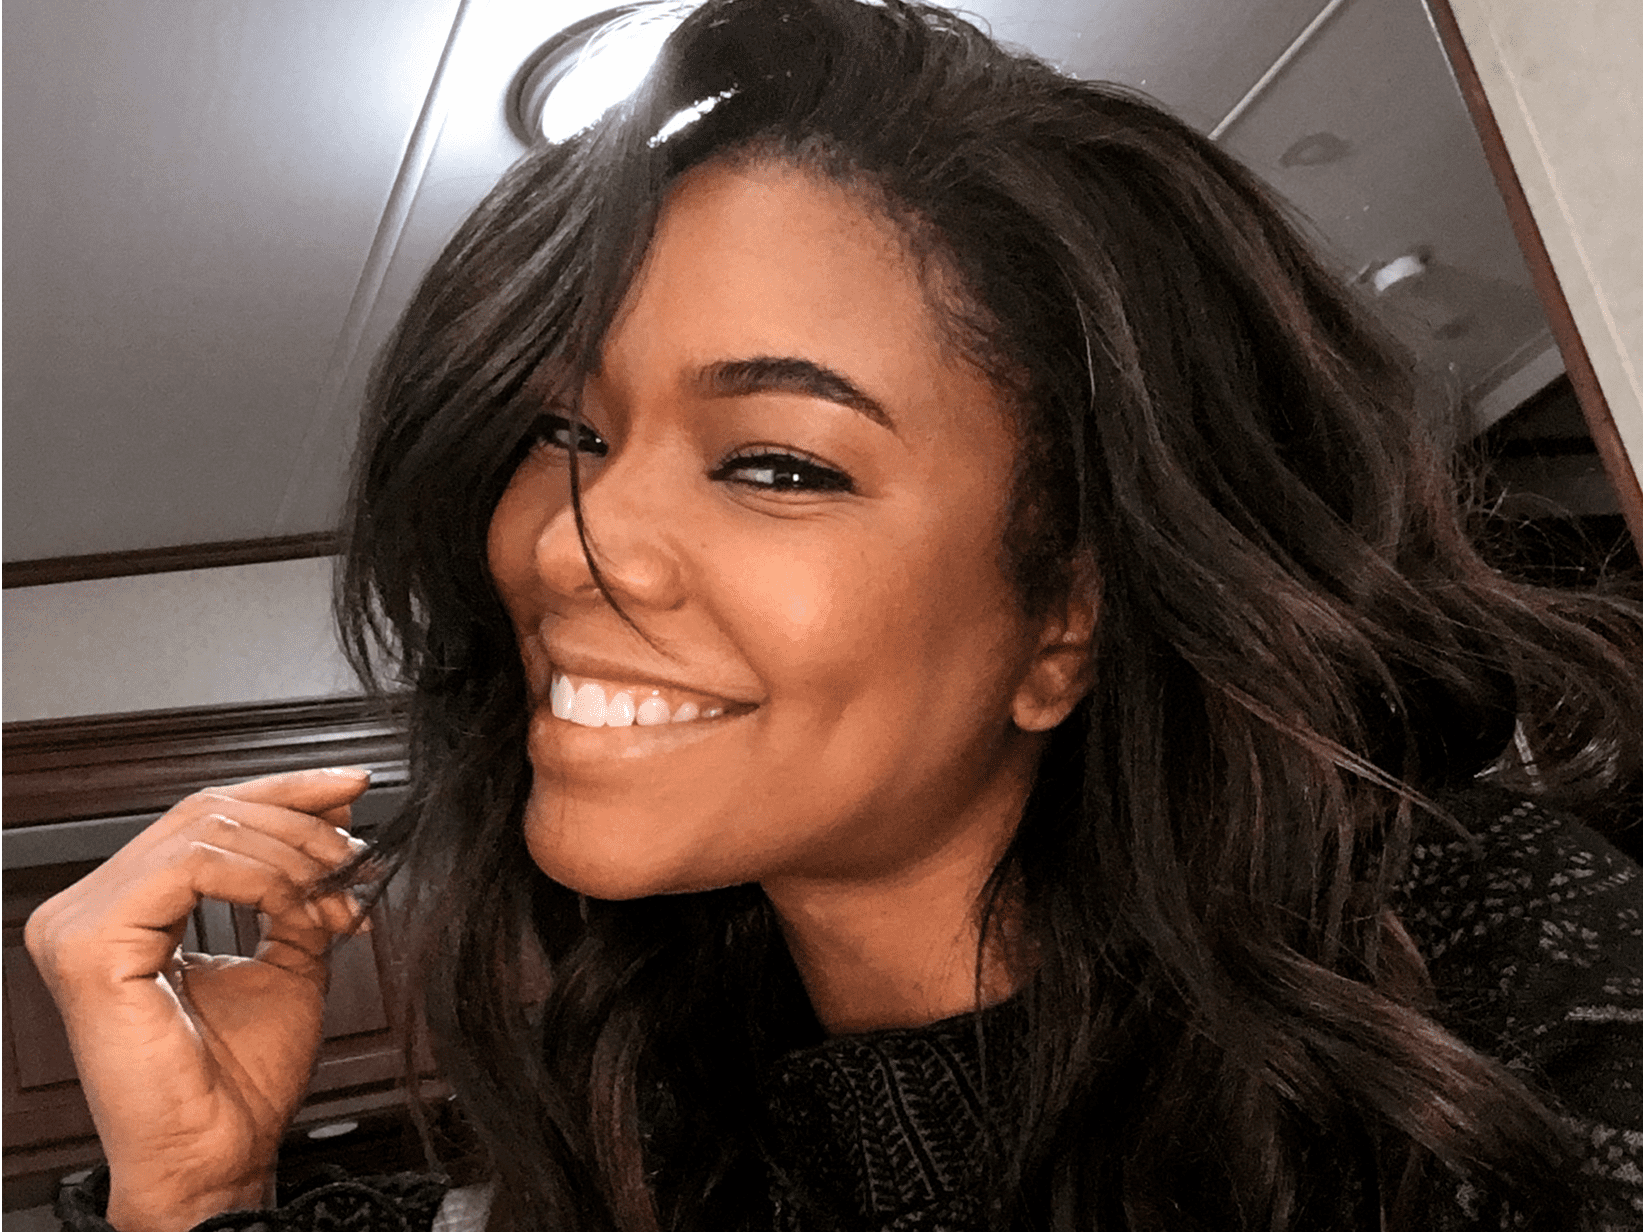 ”gabrielle-union-shows-off-her-flourishing-curls-and-fans-are-in-awe”